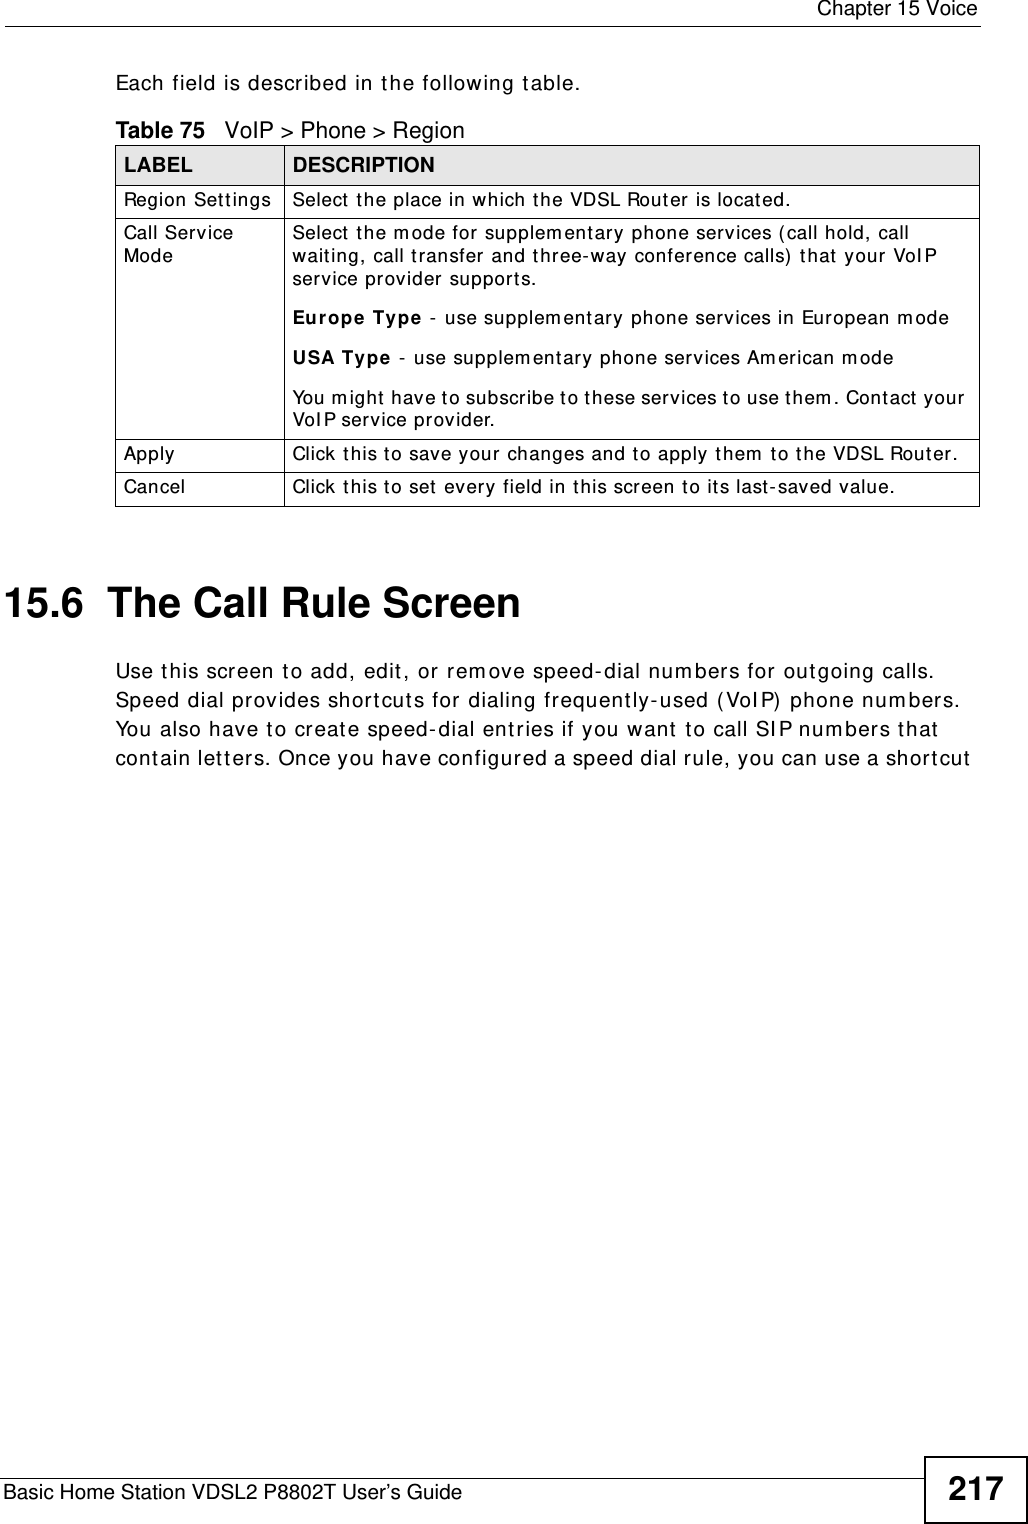  Chapter 15 VoiceBasic Home Station VDSL2 P8802T User’s Guide 217Each field is described in t he following table.15.6  The Call Rule ScreenUse t his screen to add, edit , or rem ove speed-dial num bers for out going calls. Speed dial provides short cut s for dialing frequently- used ( VoI P) phone num bers. You also have to creat e speed- dial ent ries if you want to call SI P num bers that contain let t ers. Once you have configured a speed dial rule, you can use a short cut  Table 75   VoIP &gt; Phone &gt; RegionLABEL DESCRIPTIONRegion Set t ings Select the place in which the VDSL Router is located.Call Service ModeSelect  the m ode for supplem ent ary phone services (call hold, call waiting, call transfer and three- way conference calls)  that your VoI P service provider support s.Europe  Type - use supplem entary phone services in European m odeUSA Type  -  use supplem ent ary phone ser vices Am erican m odeYou m ight have to subscribe t o these services to use them. Contact your VoI P ser vice provider.Apply Click this to save your changes and to apply them to the VDSL Router.Cancel Click t his to set every field in this screen to it s last-saved value.